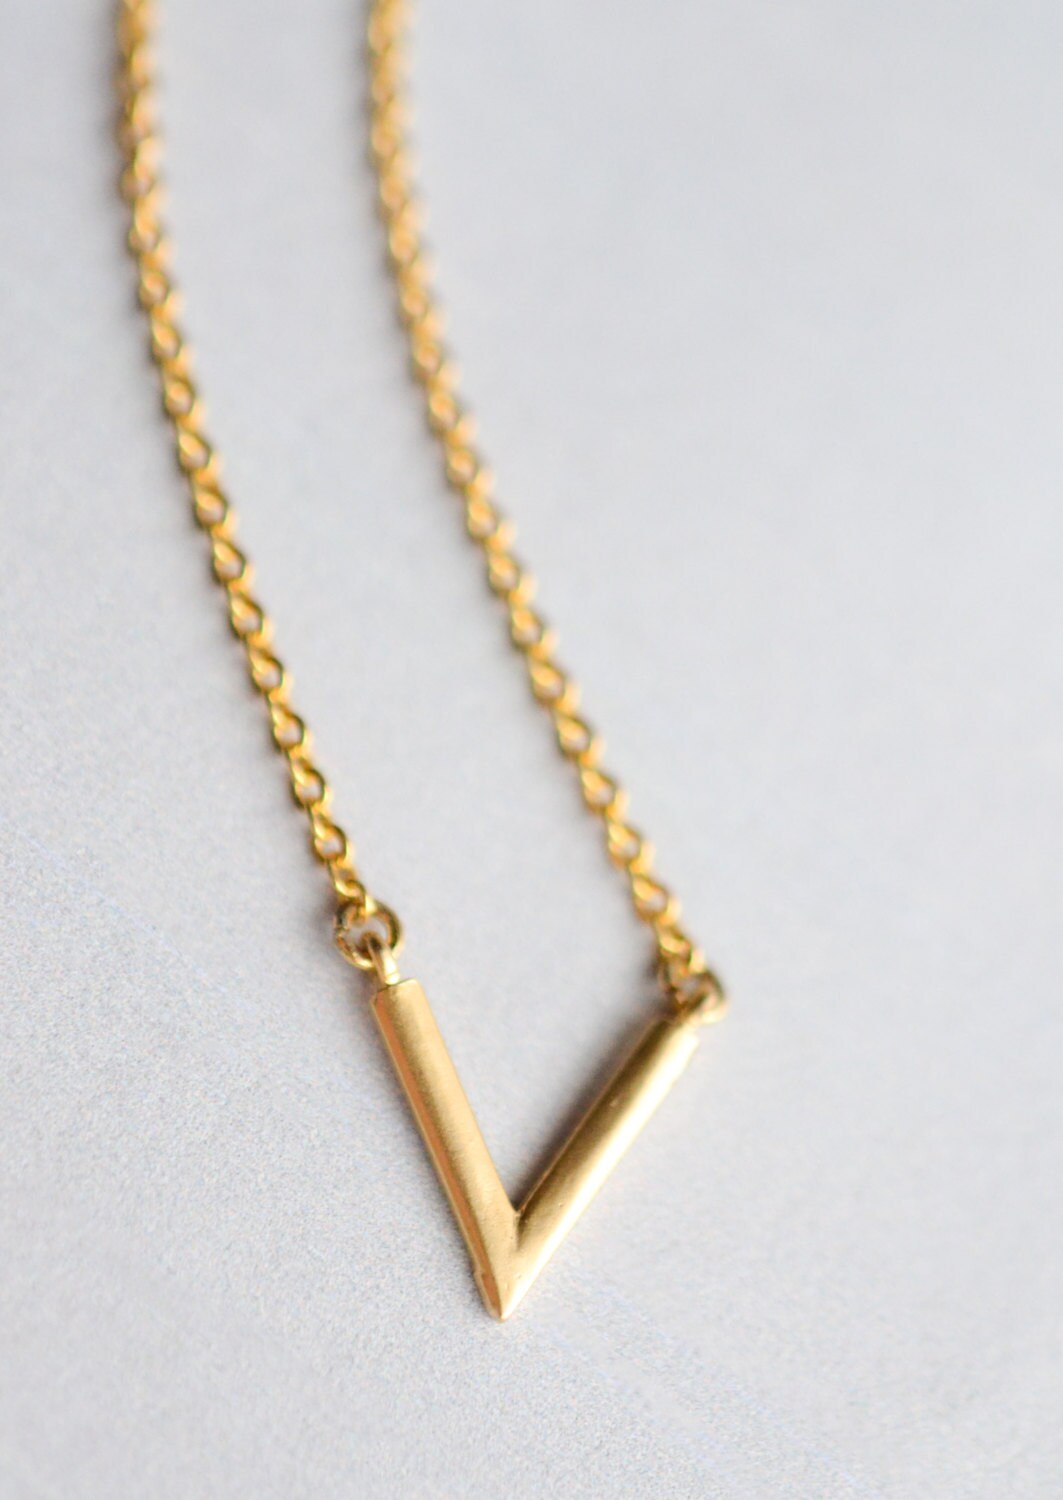 Gold V Necklace // Gold Chevron Necklace  // Simple Gold V Pendant Necklace // GIFT For Her // Geometric // Bridesmaid Gift